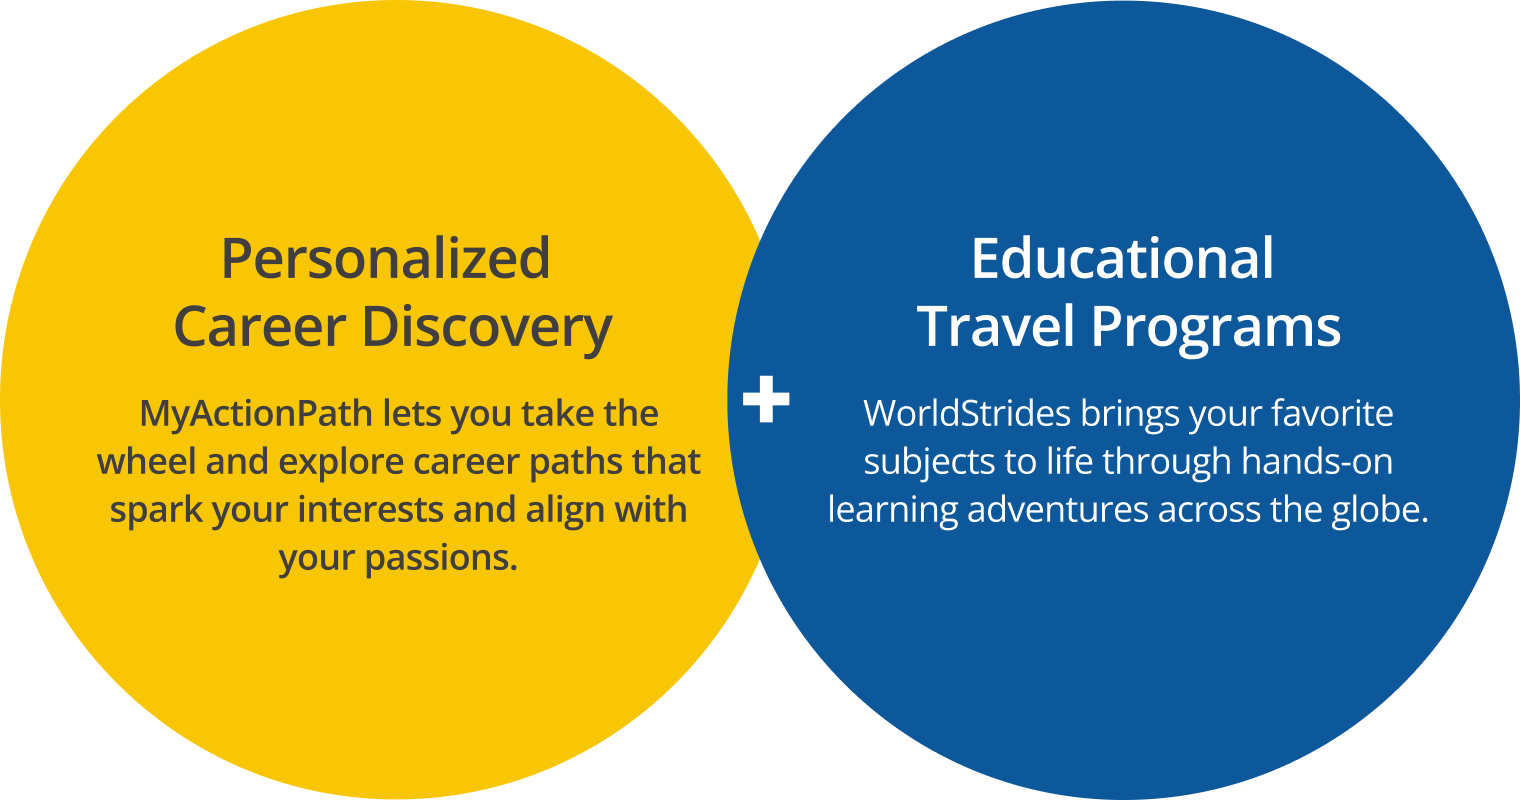 Personalized Career Discover and Educational Travel Programs